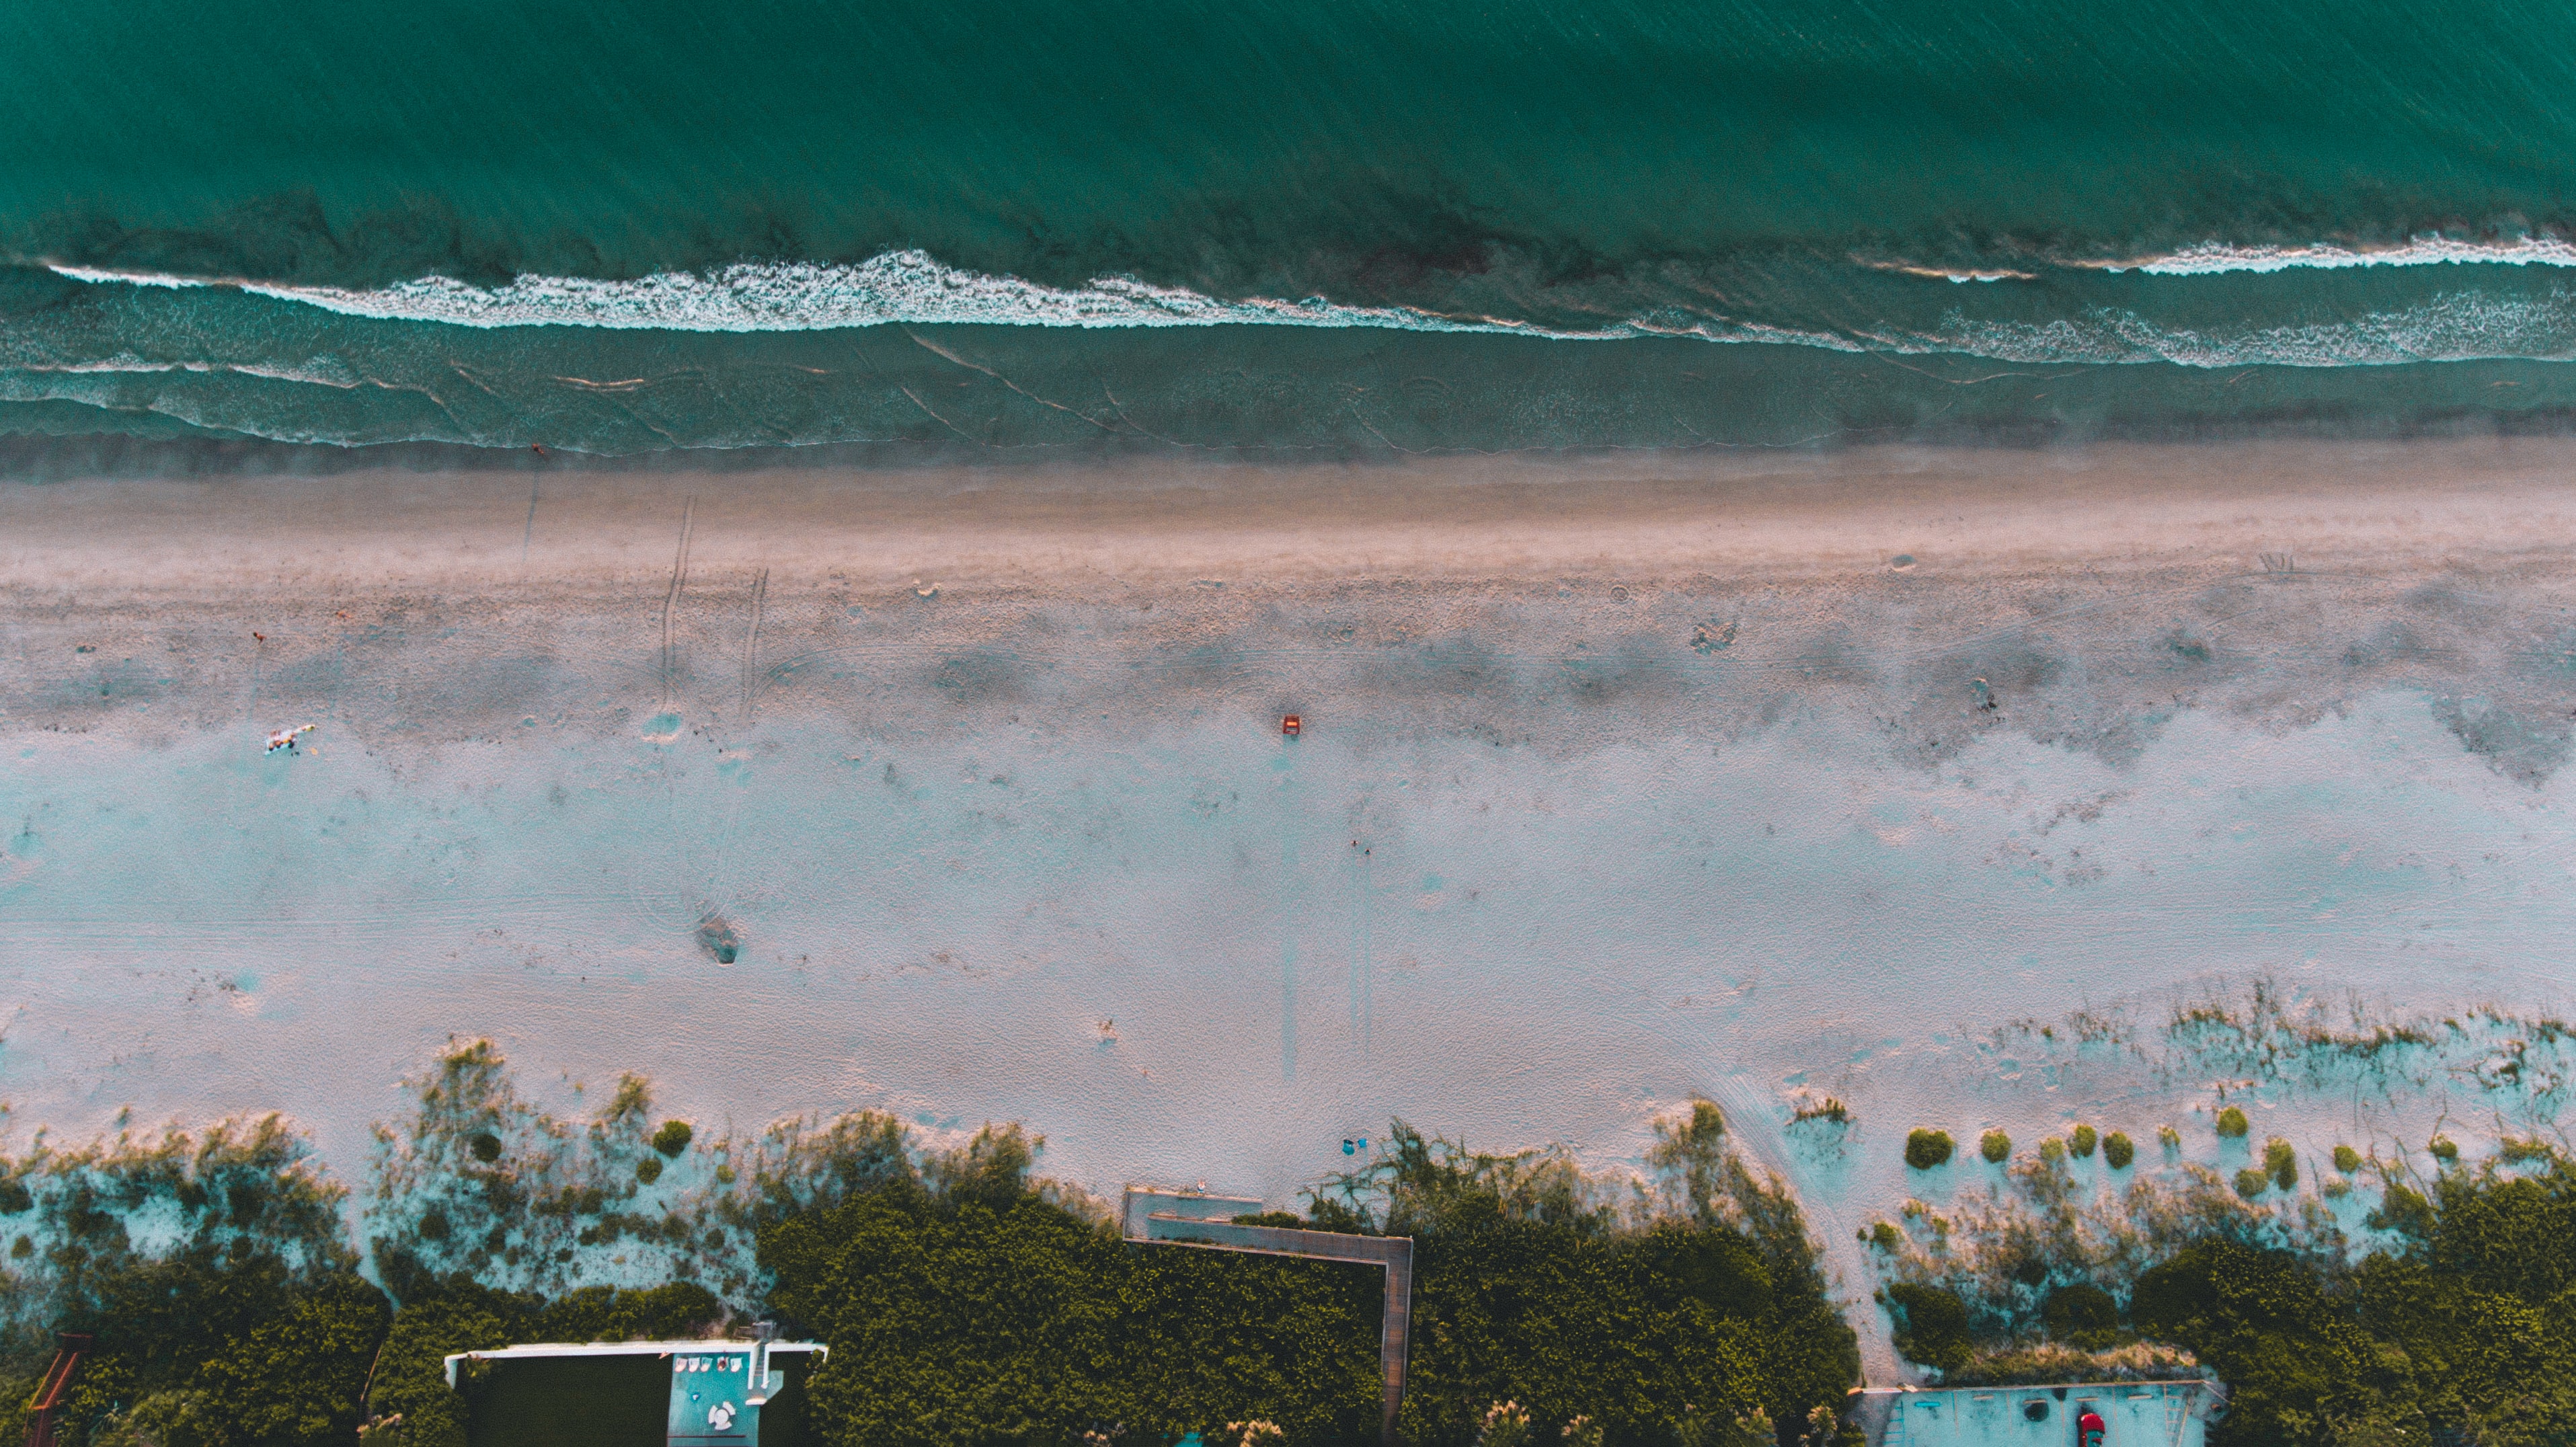 Aerial view by drone of Melbourne Beach, FL; image by Aral Tasher, via Unsplash.com.